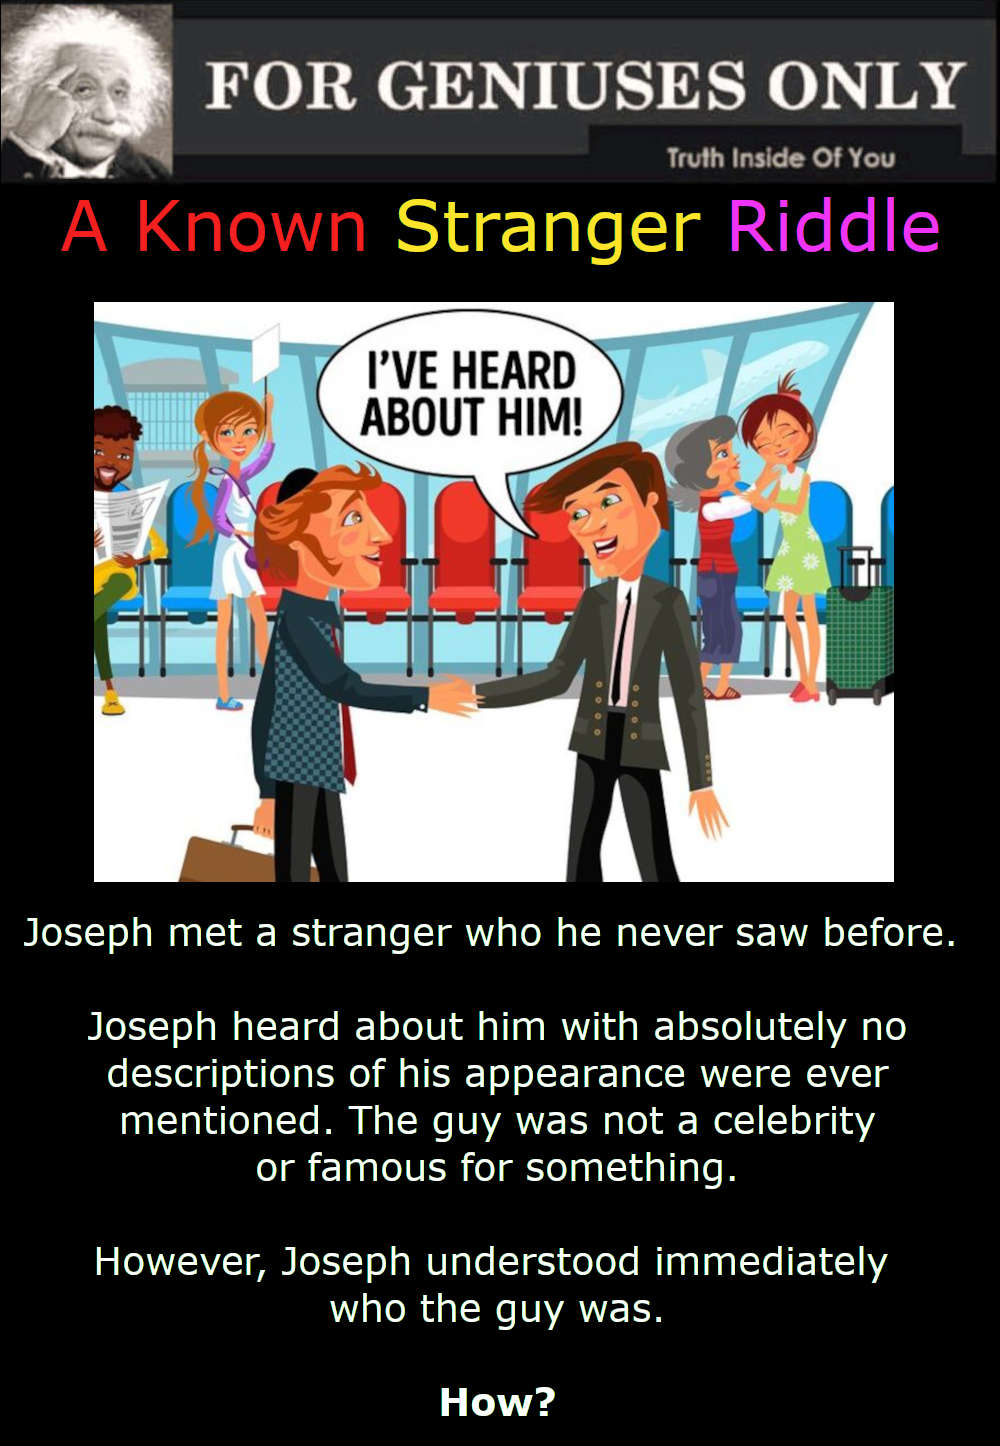 A Known Stranger Riddle